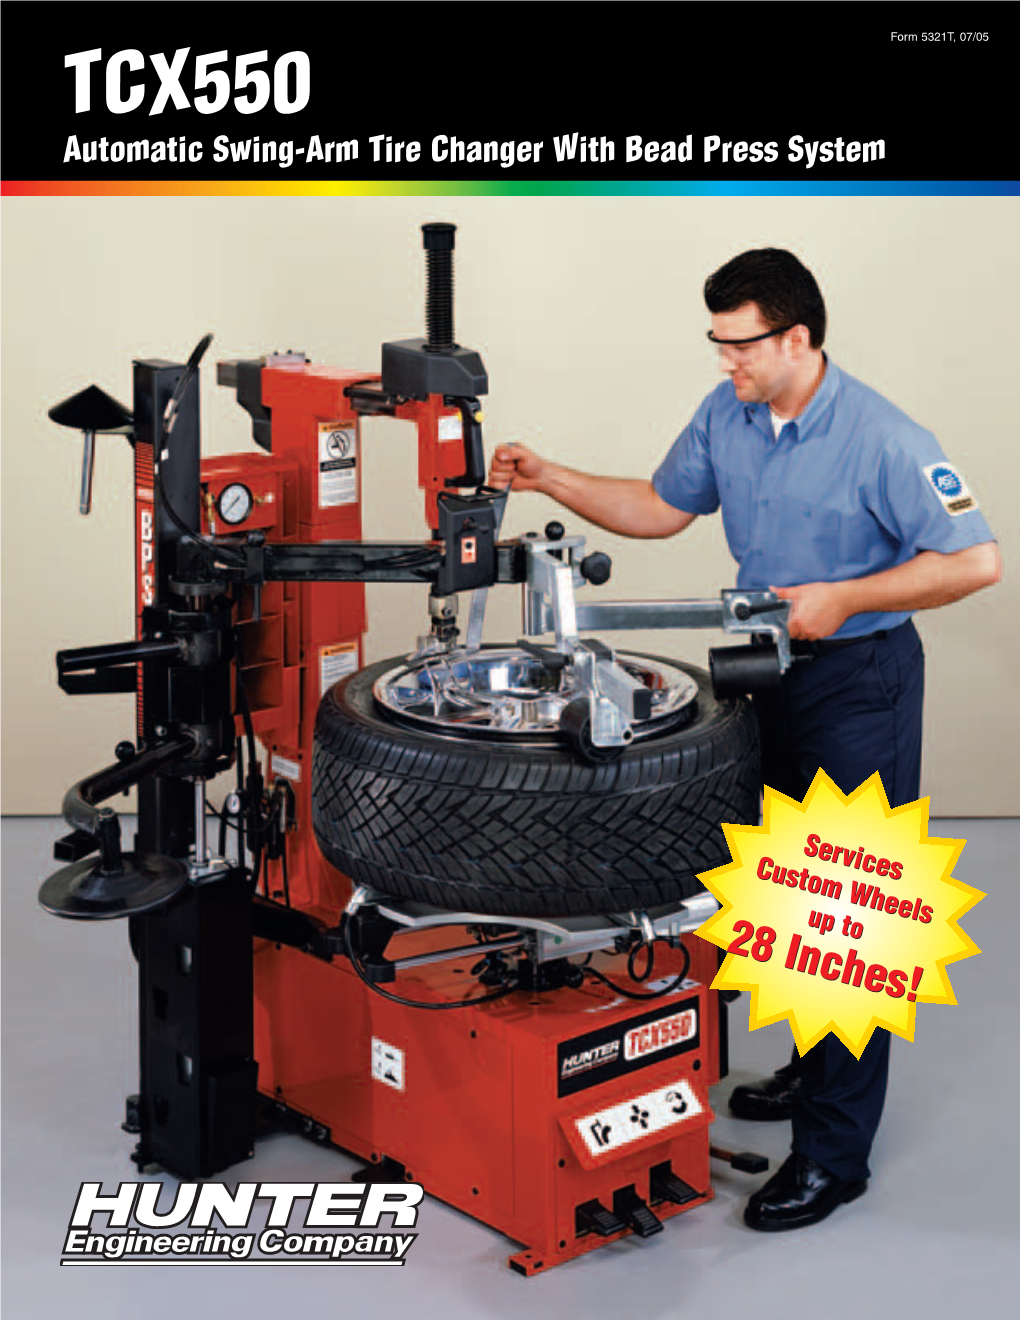 TCX550 Automatic Swing-Arm Tire Changer with Bead Press System